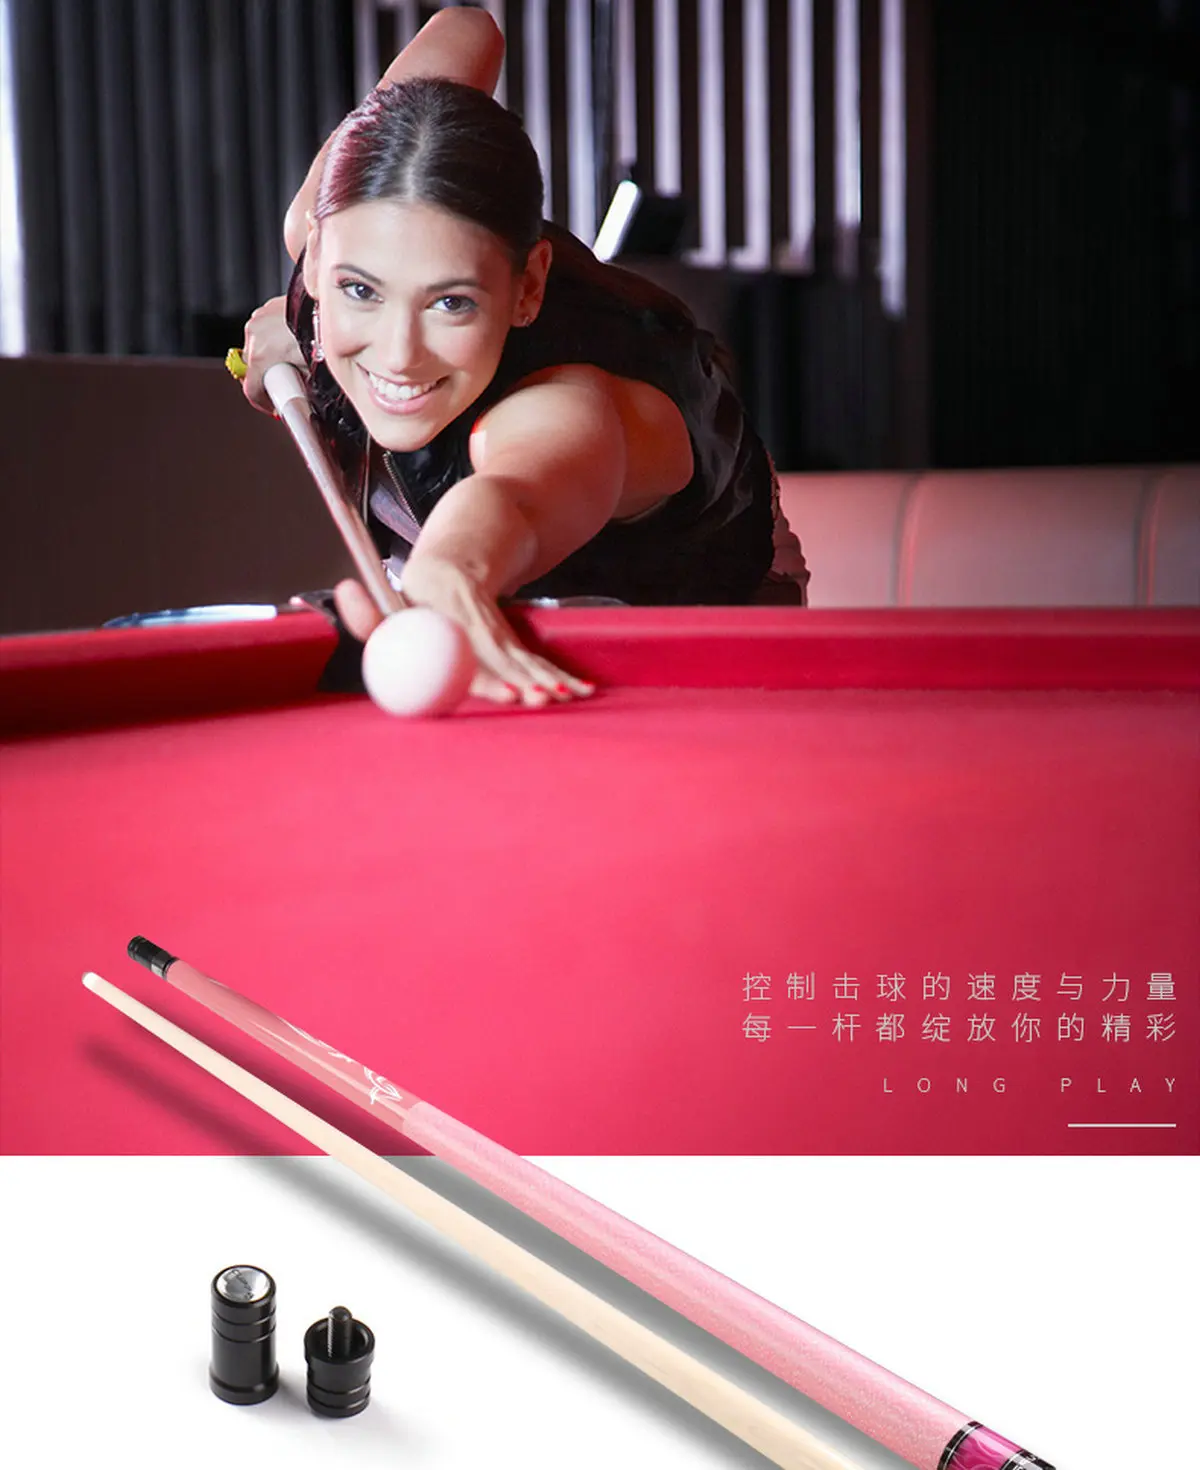 Details about   CUPPA  57" Snooker Billiard Pool Cue Stick 1/2 Set Lady Girl Favorite Style 